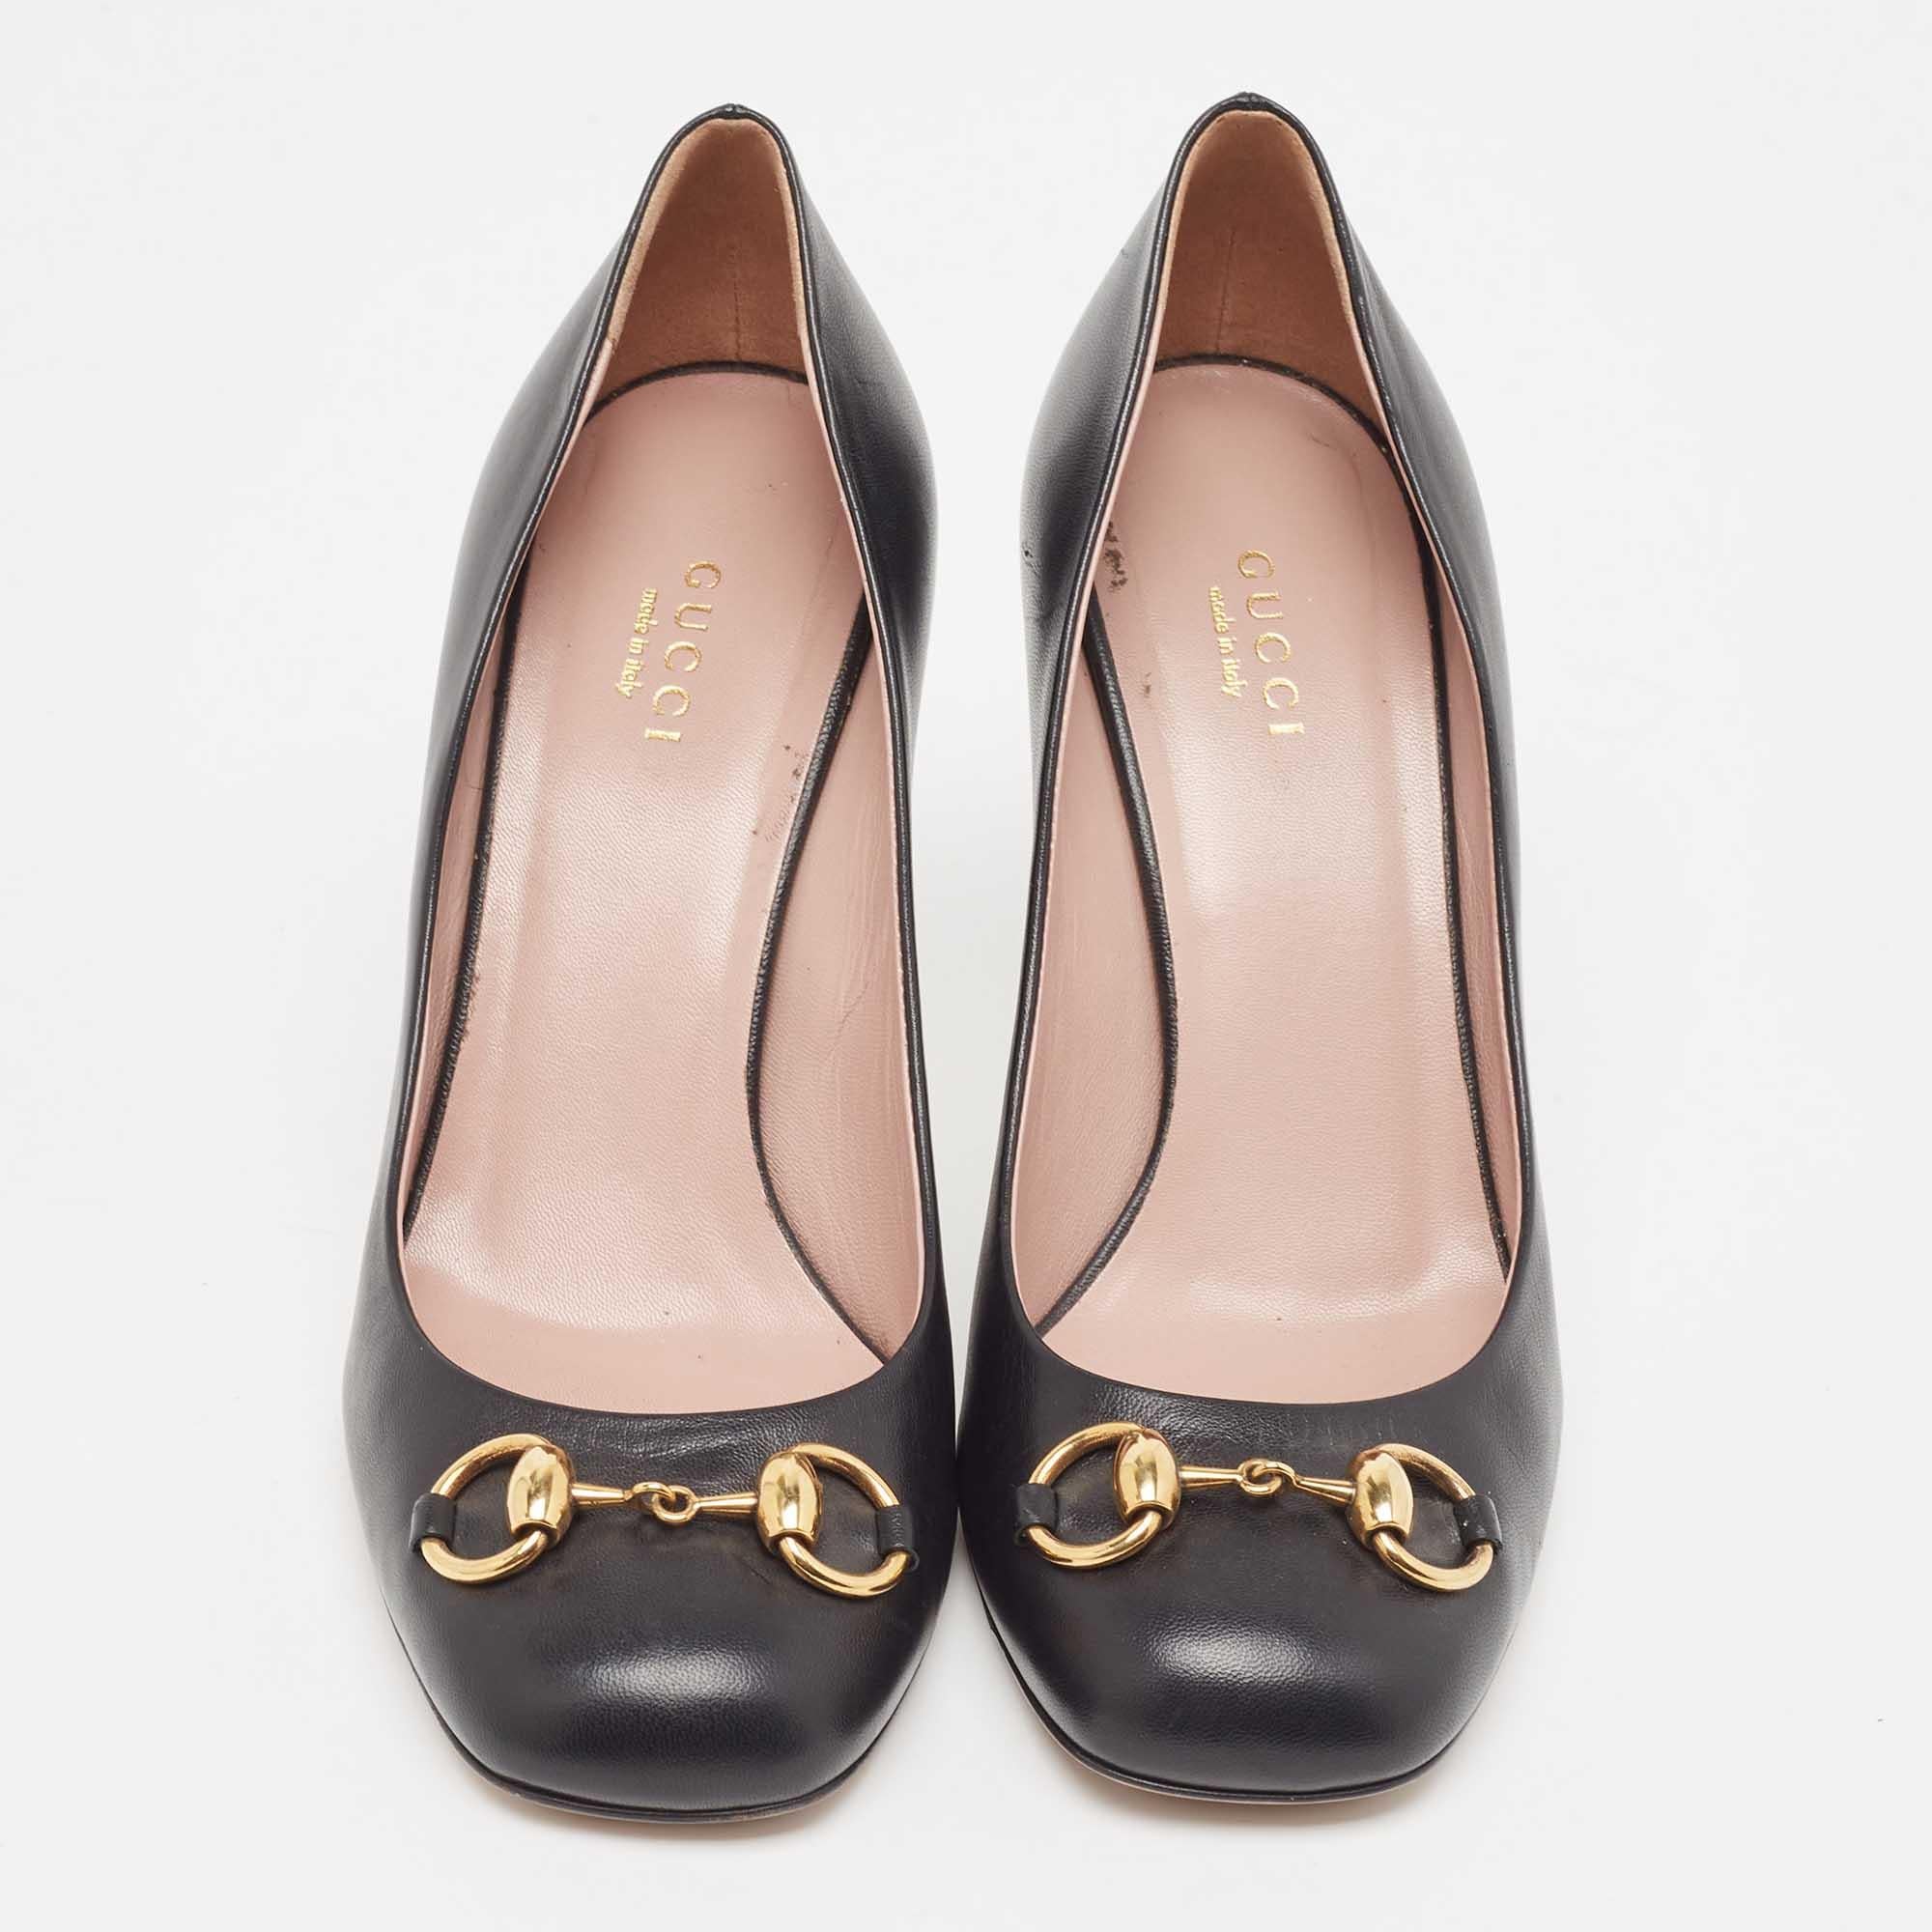 Exhibit an elegant style with this pair of pumps. These Gucci shoes for women are crafted from quality materials. They are set on durable soles and sleek heels.

